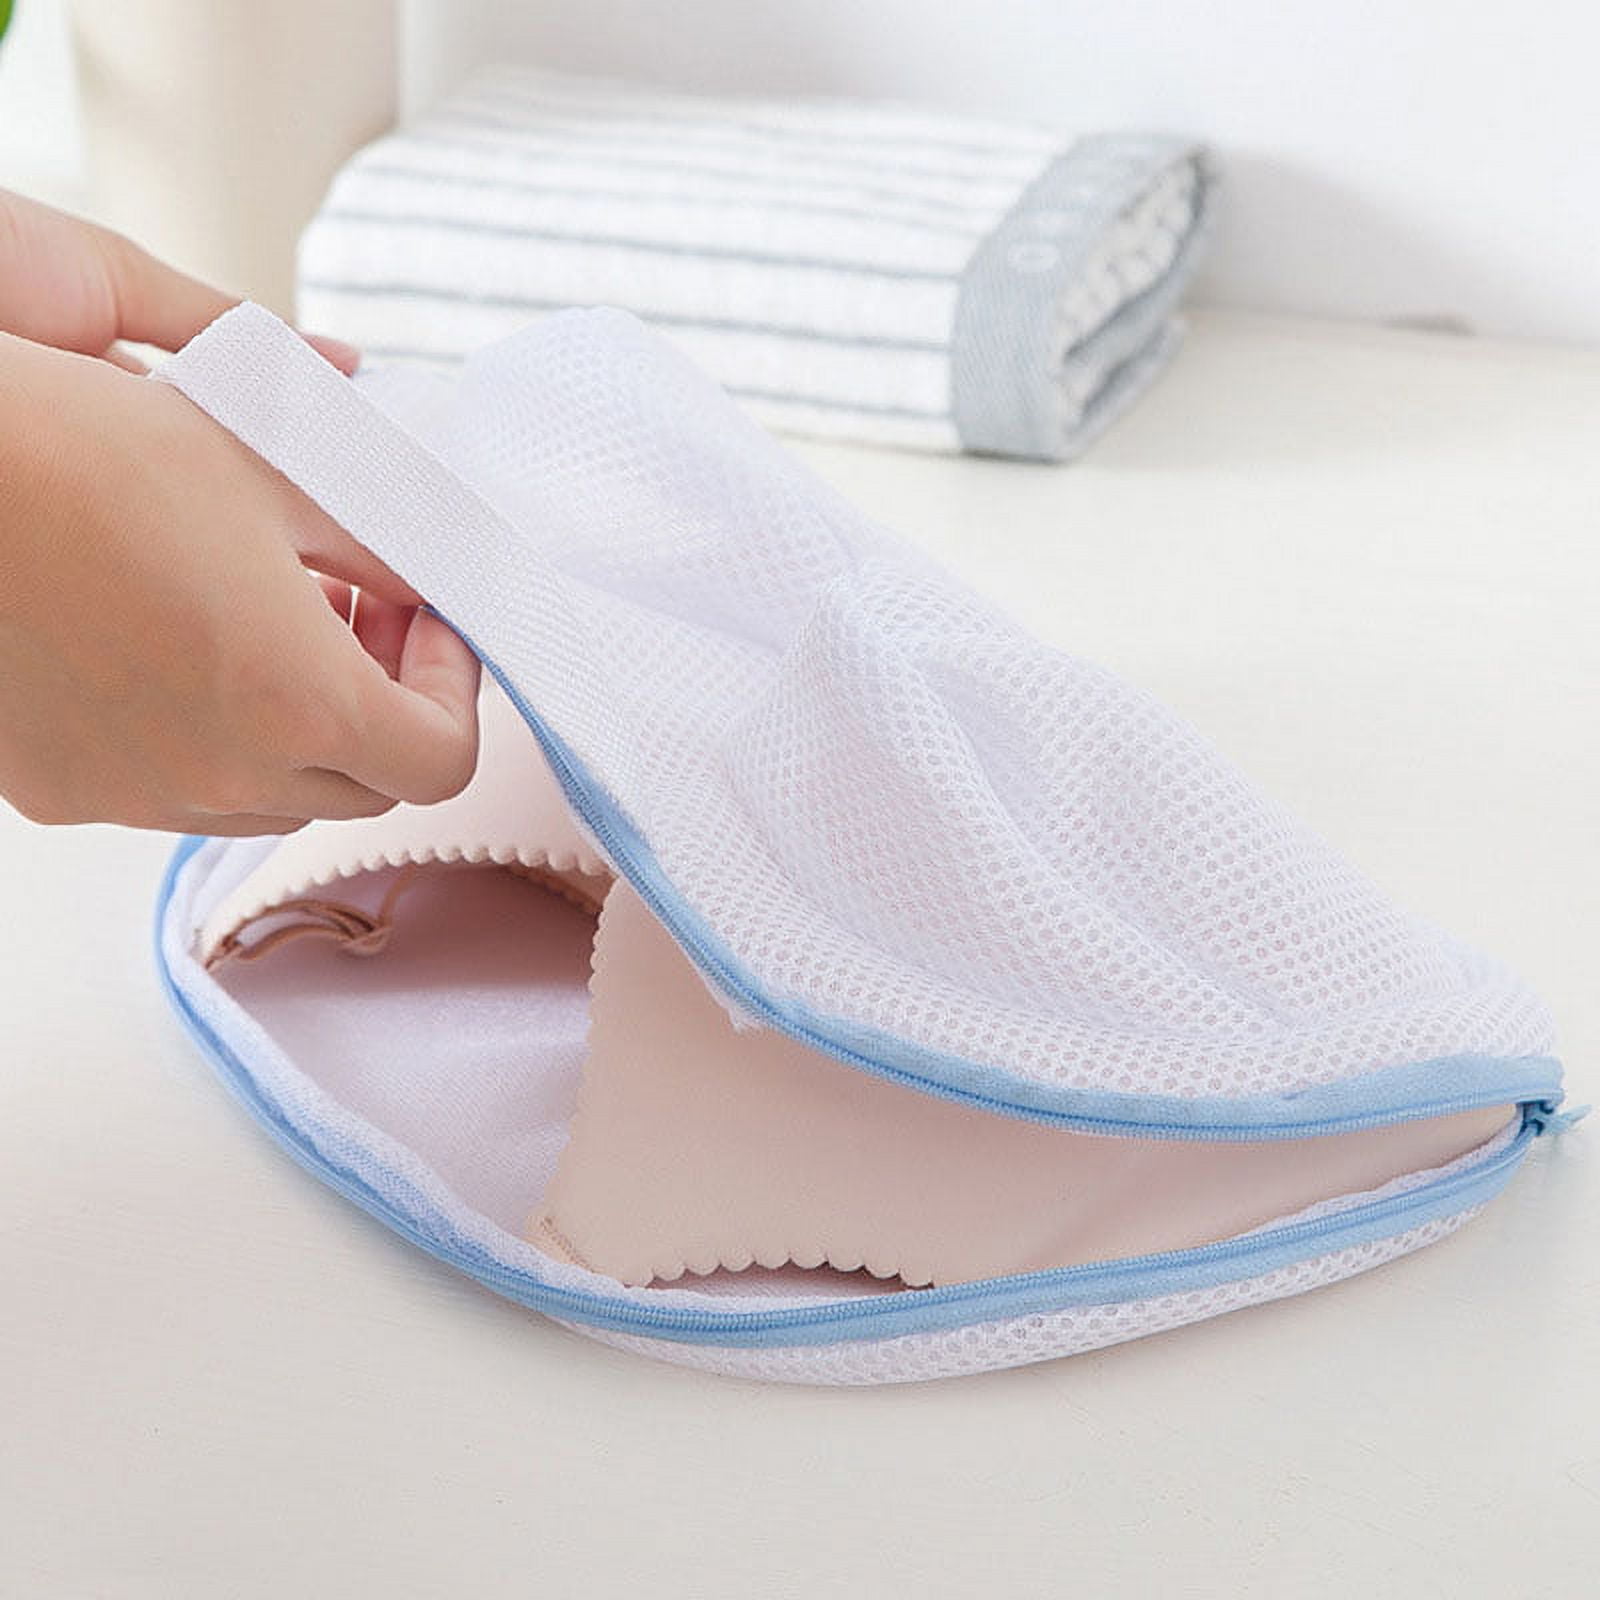 Laundry Bags Shoe Washing Bag | Wash For Sneaker In Machine Breathable  Chenille Cleaning Bras Socks S 230912 From Hu10, $49.14 | DHgate.Com